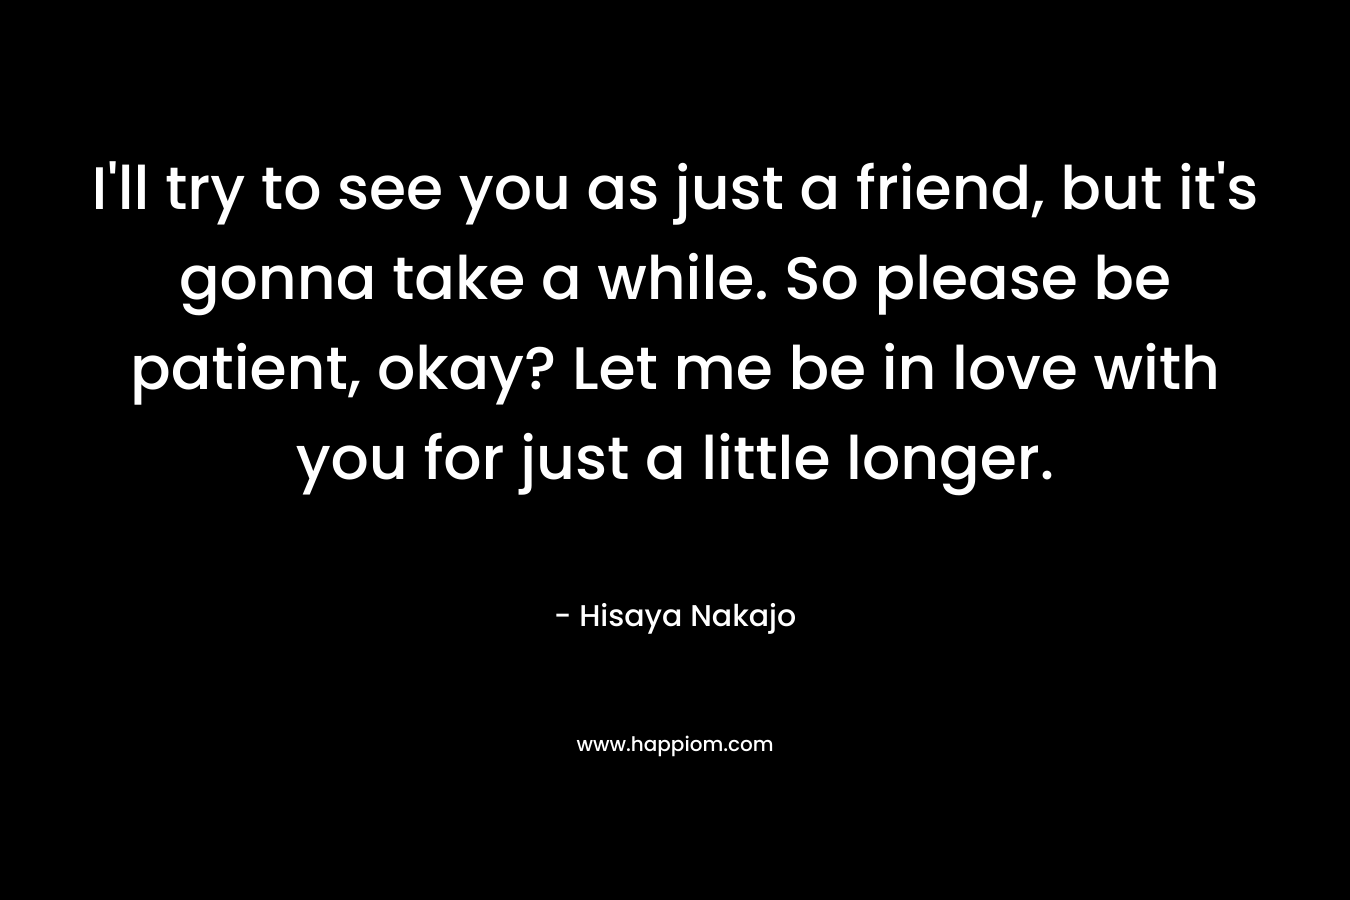 I’ll try to see you as just a friend, but it’s gonna take a while. So please be patient, okay? Let me be in love with you for just a little longer. – Hisaya Nakajo